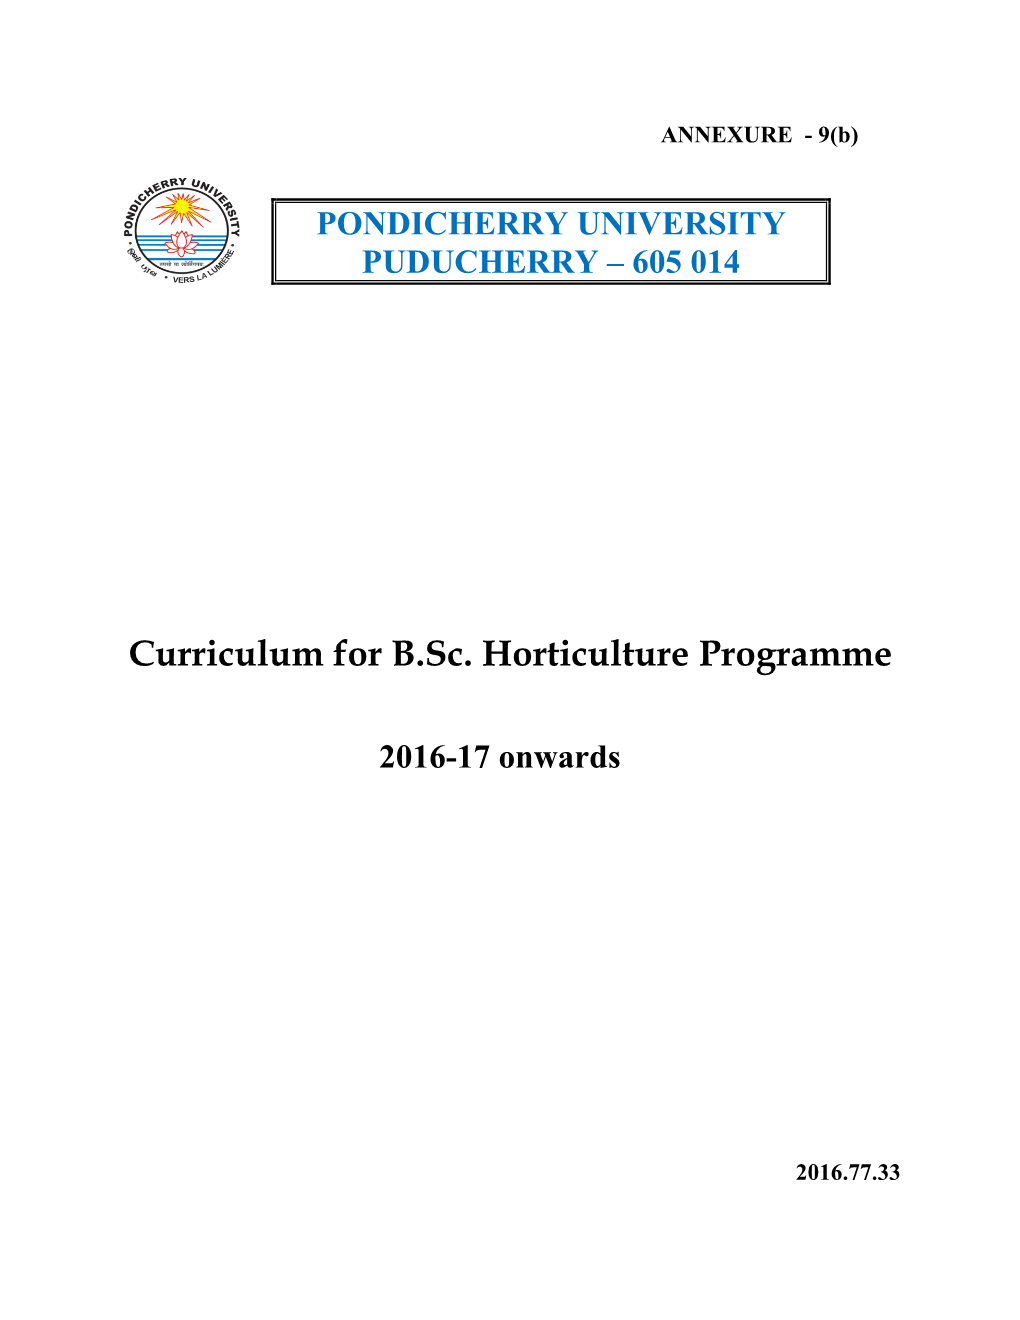 Curriculum for B.Sc. Horticulture Programme